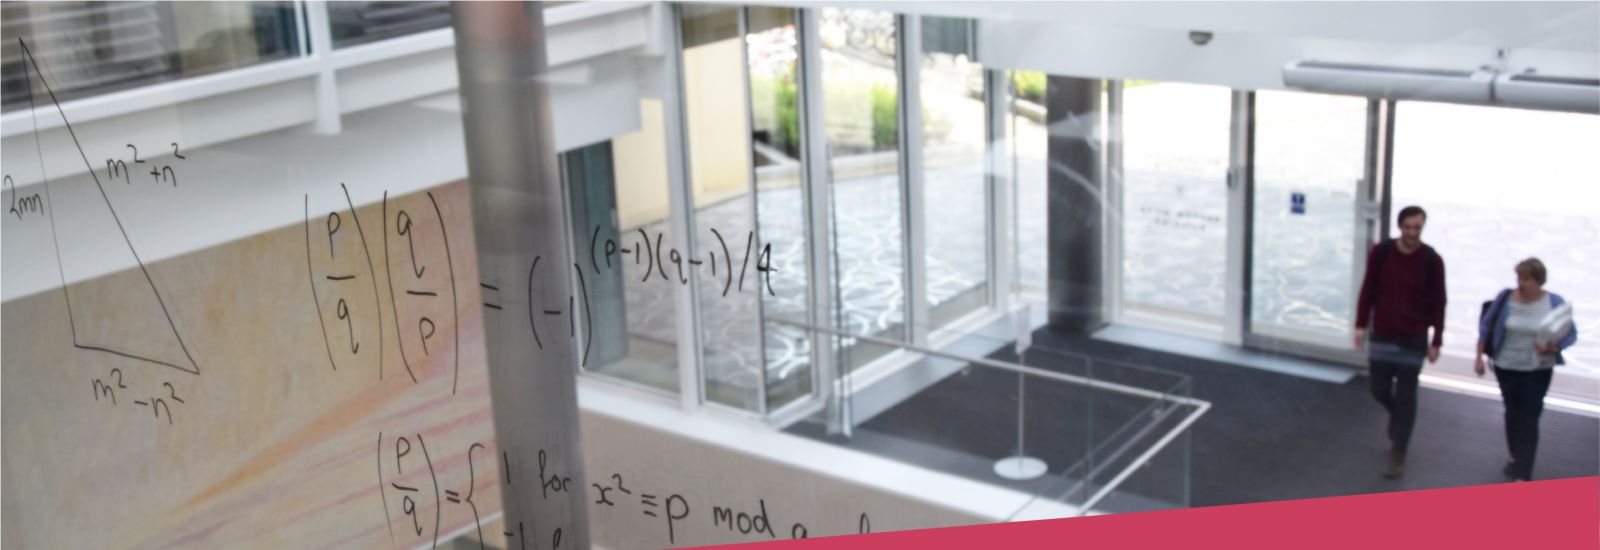 Equations written on glass looking over the entrance to the Mathematical Institute.